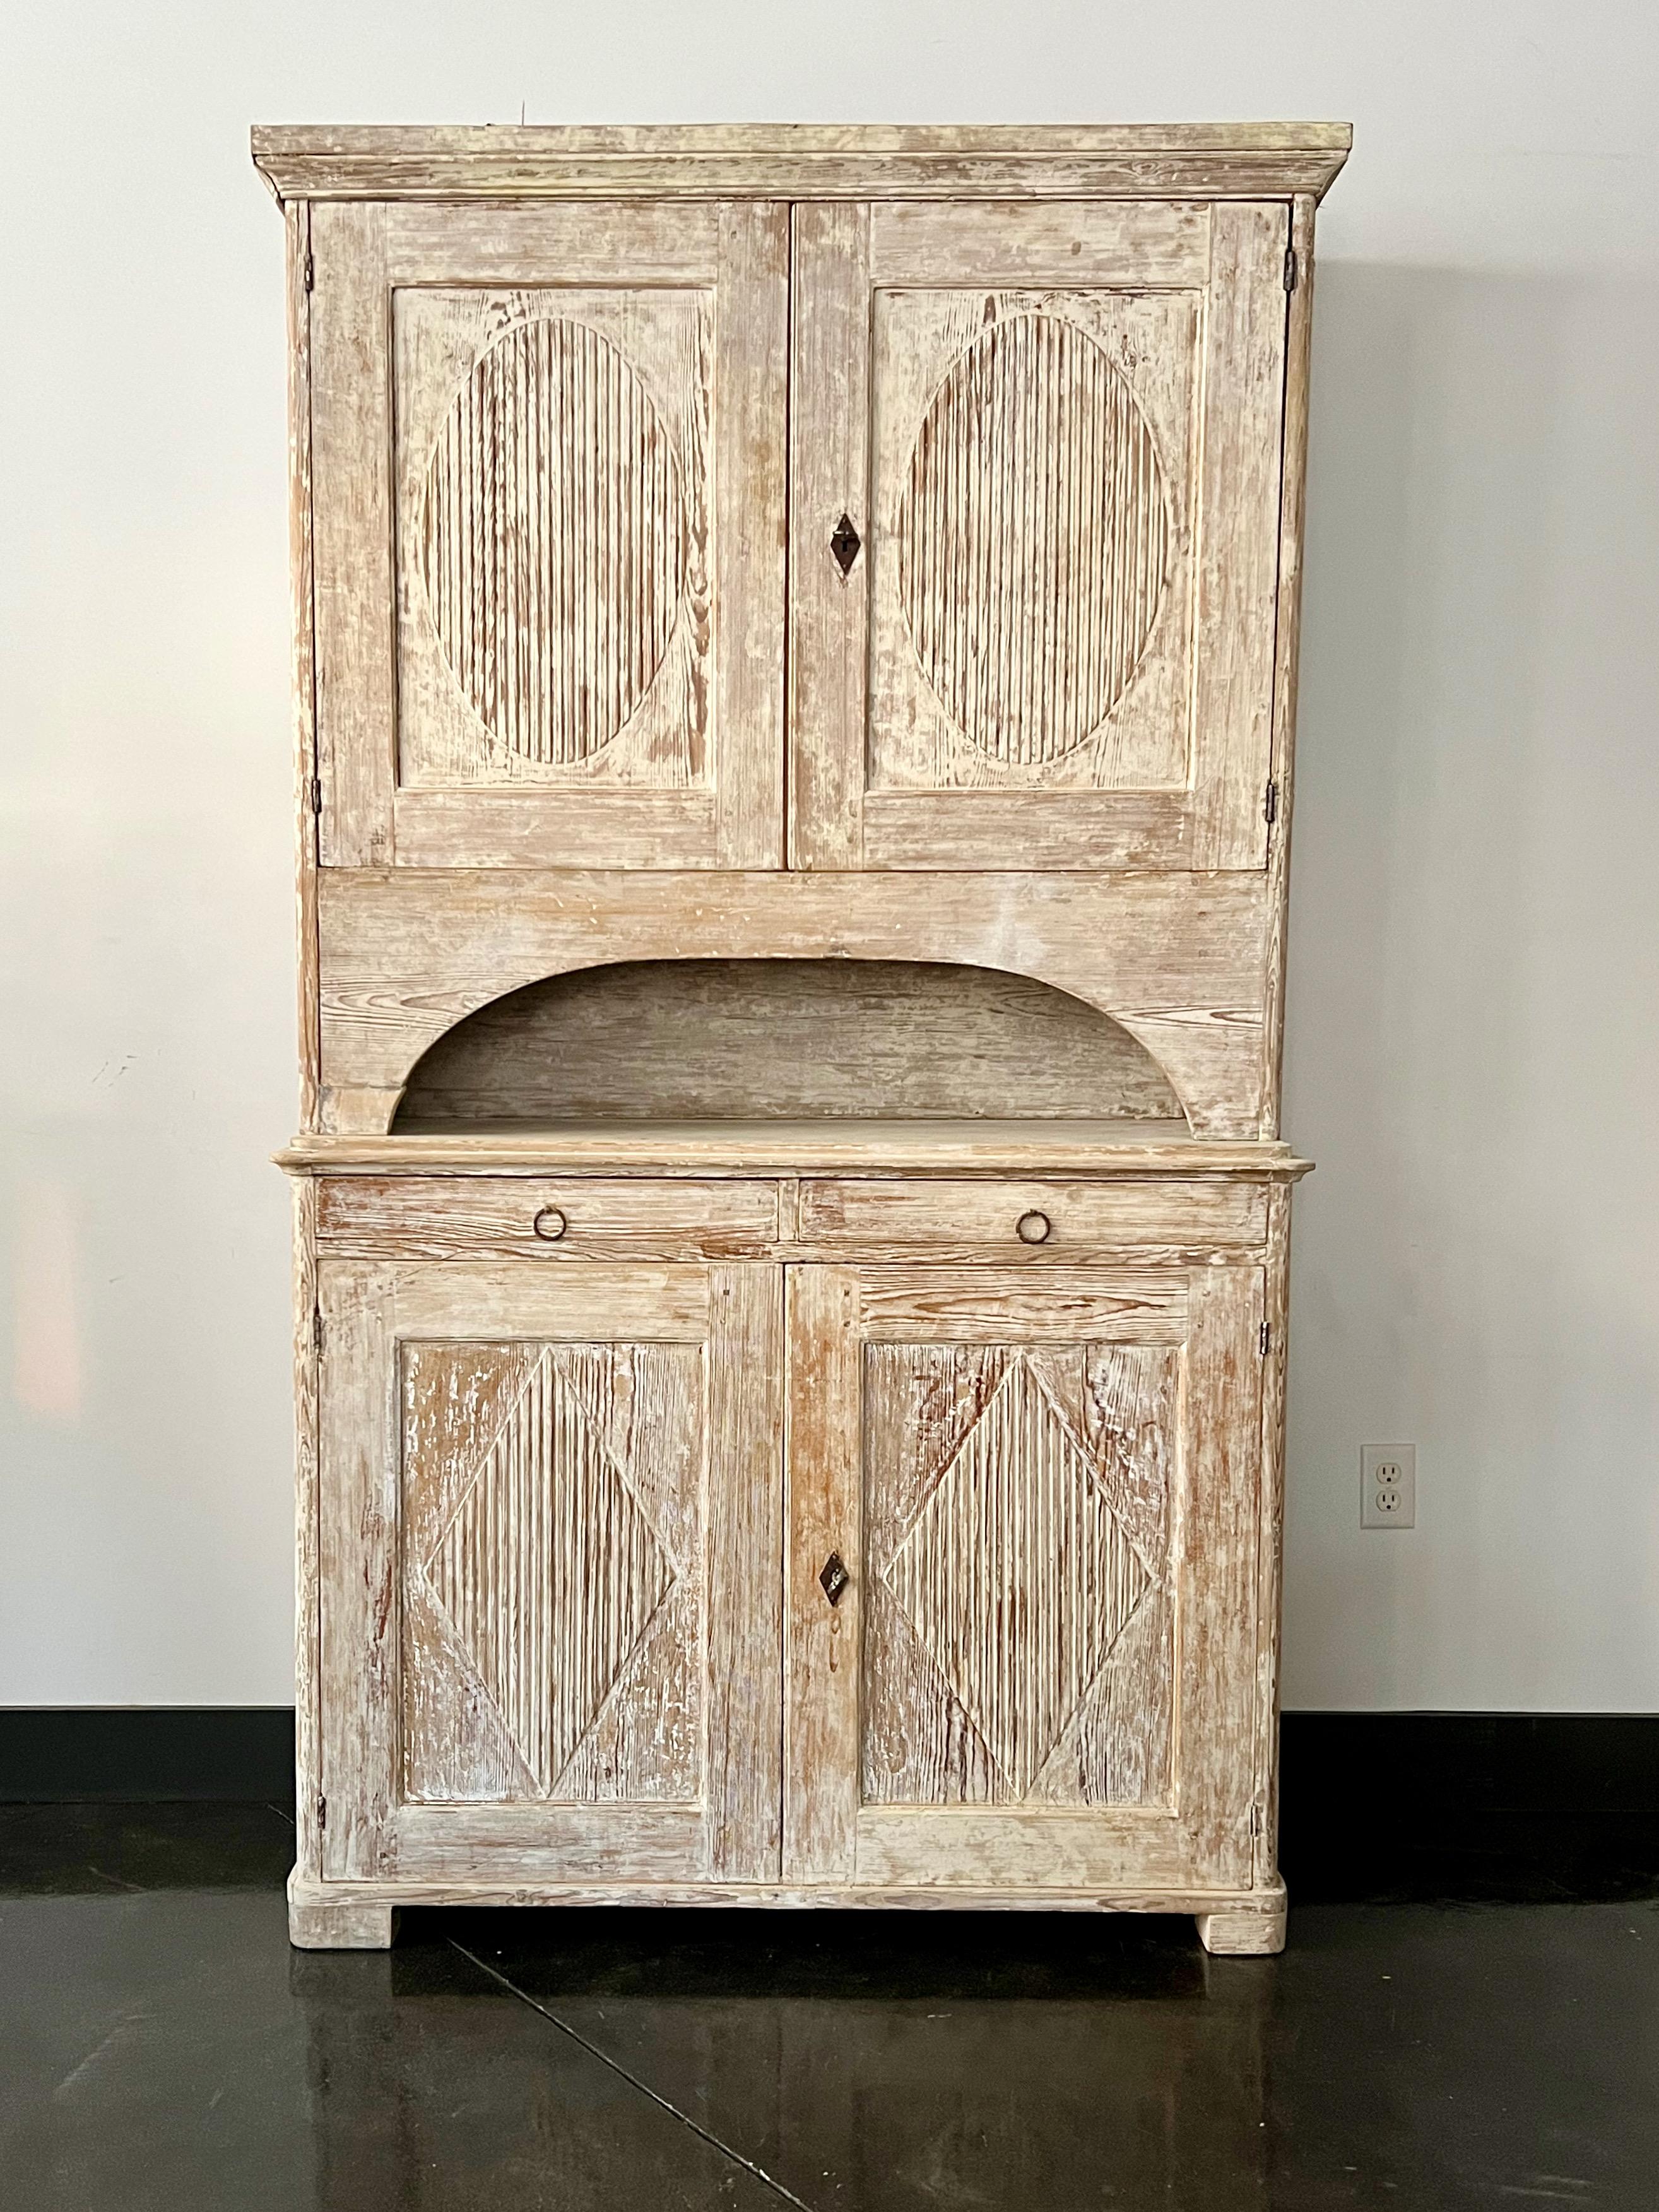 19th century Swedish cabinet in two parts displays classic Gustavian styling with reeded, shaped decor door panels in worn cream white patina scraped back to most its original finish.
Supported the sturdy two-door base with block feet.
 Very